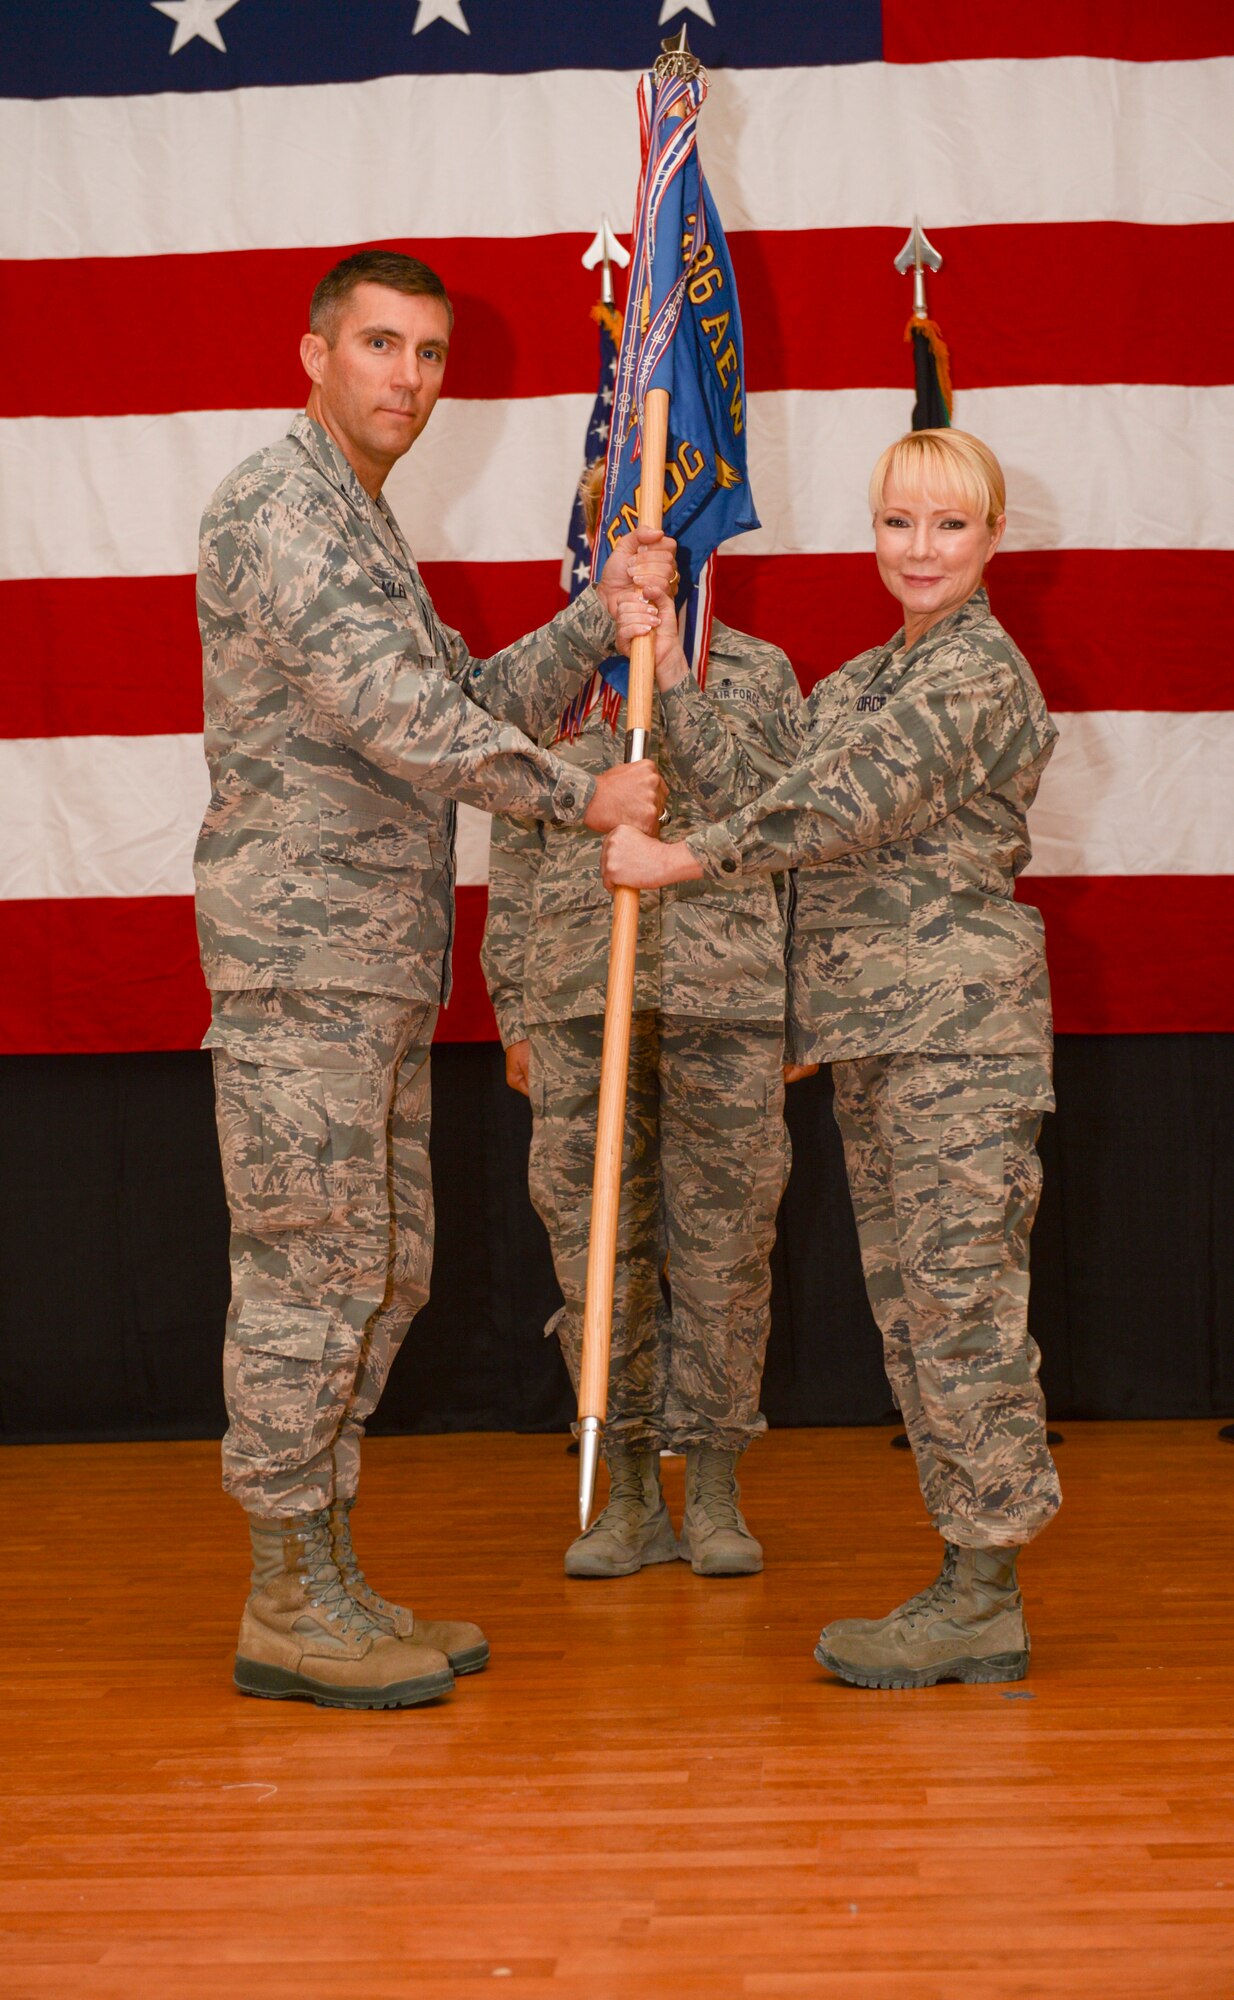 Col. Susan Davis, 386th Expeditionary Medical Group incoming commander, accepts the 386th EMDG guidon from Col. John Klein, 386th Air Expeditionary Wing commander, during a change of command ceremony held June 8, 2014 at The Rock. Col. Jeanine Ryder relinquished command of the 386th EMDG to Davis who deployed from the 59th Medical Wing, Joint Base San Antonio-Lackland, Texas. (U.S. Air Force photo by Staff Sgt. Jeremy Bowcock)